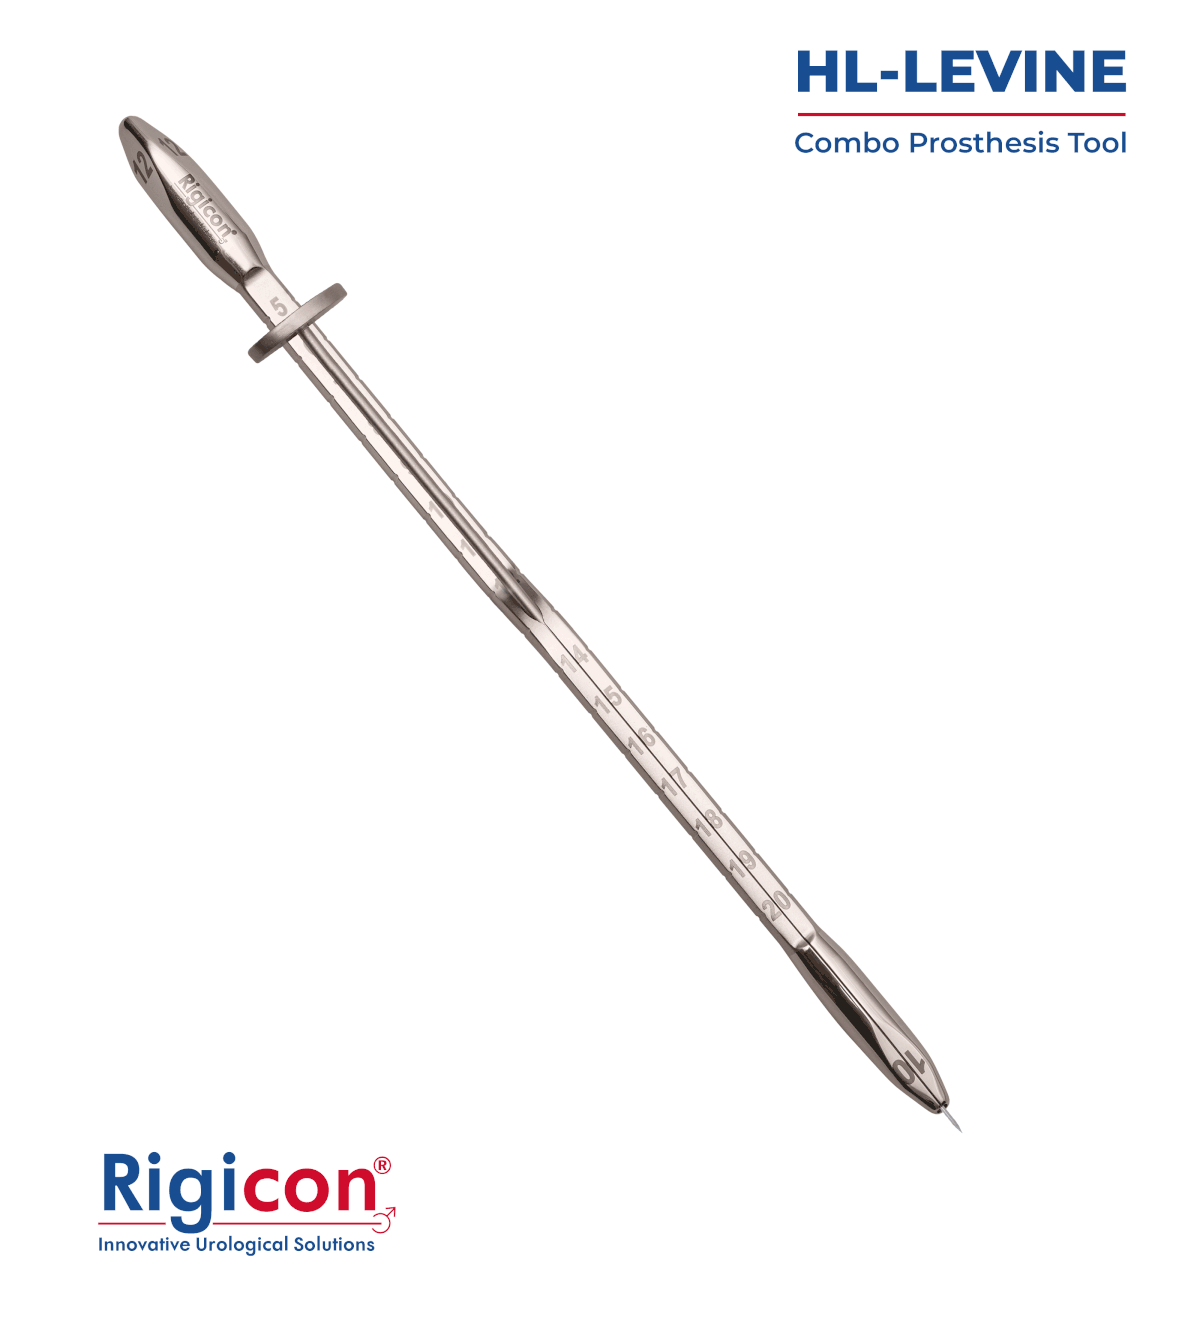 HL-LEVINE™ Combo Prosthesis Tool